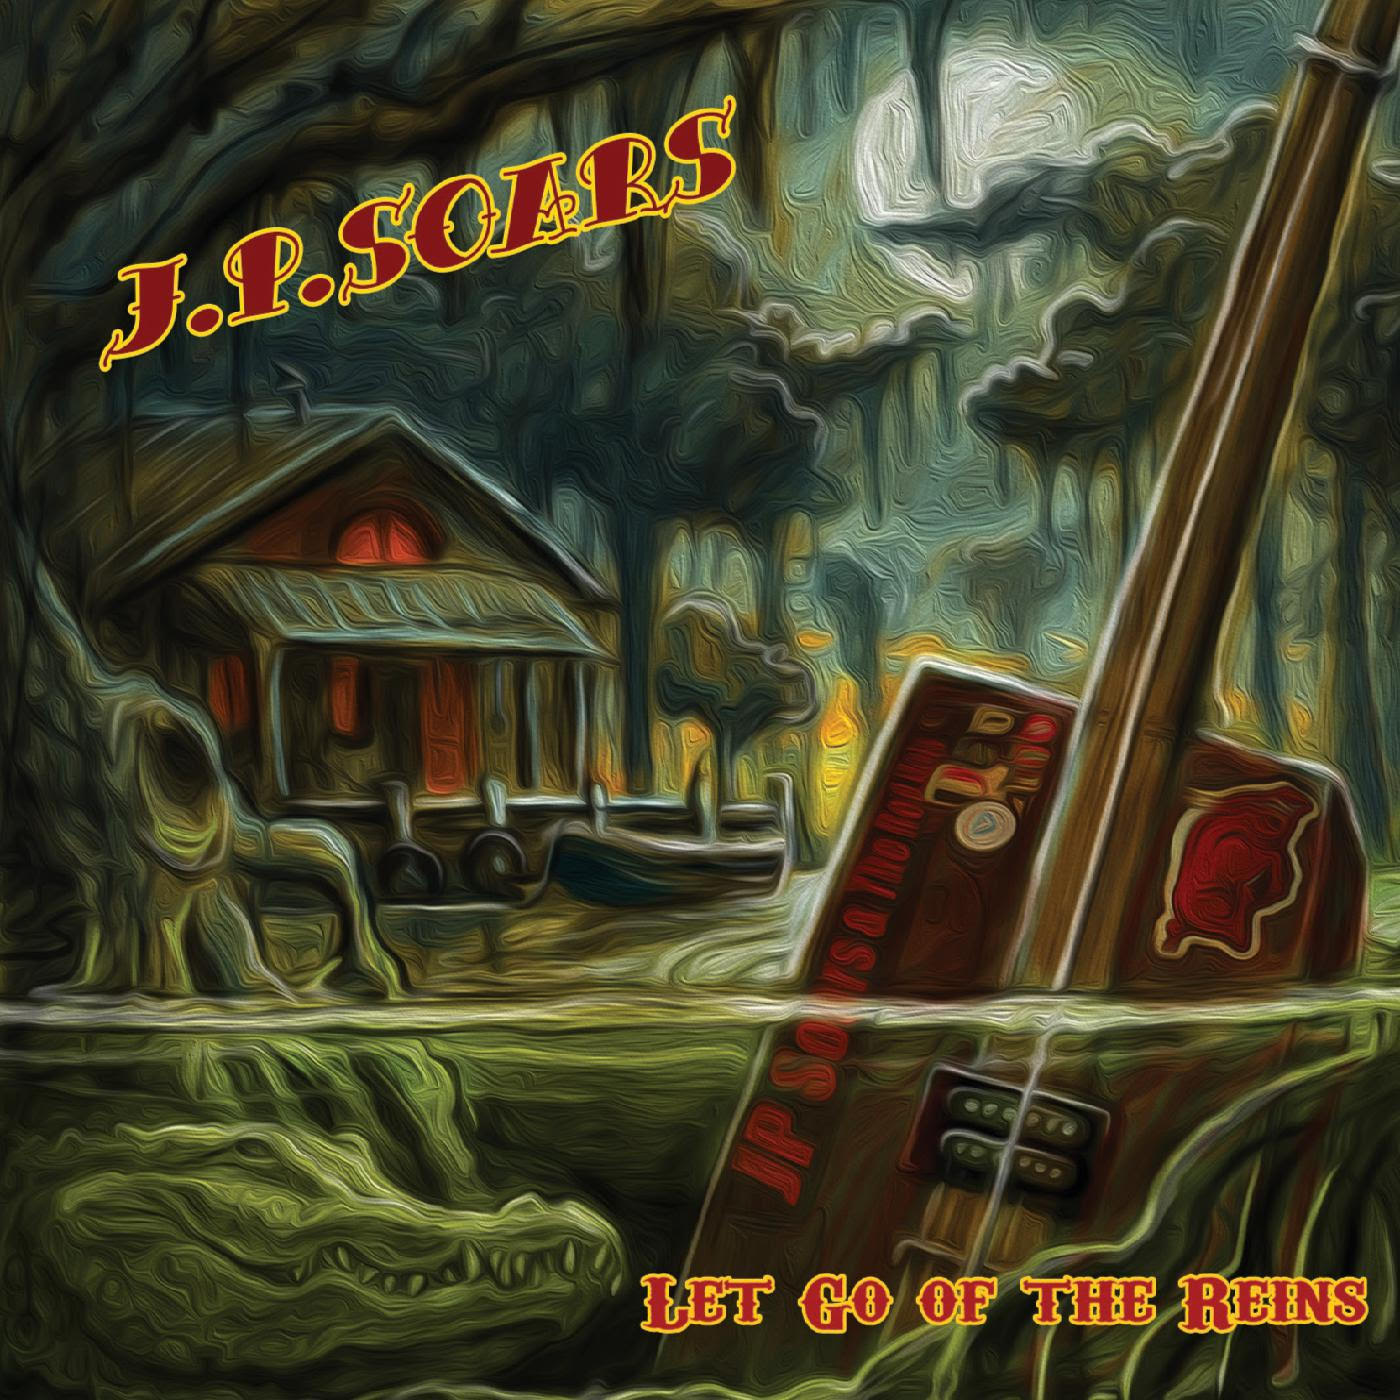 J.P. Soars set to release "Let Go Of The Reins"